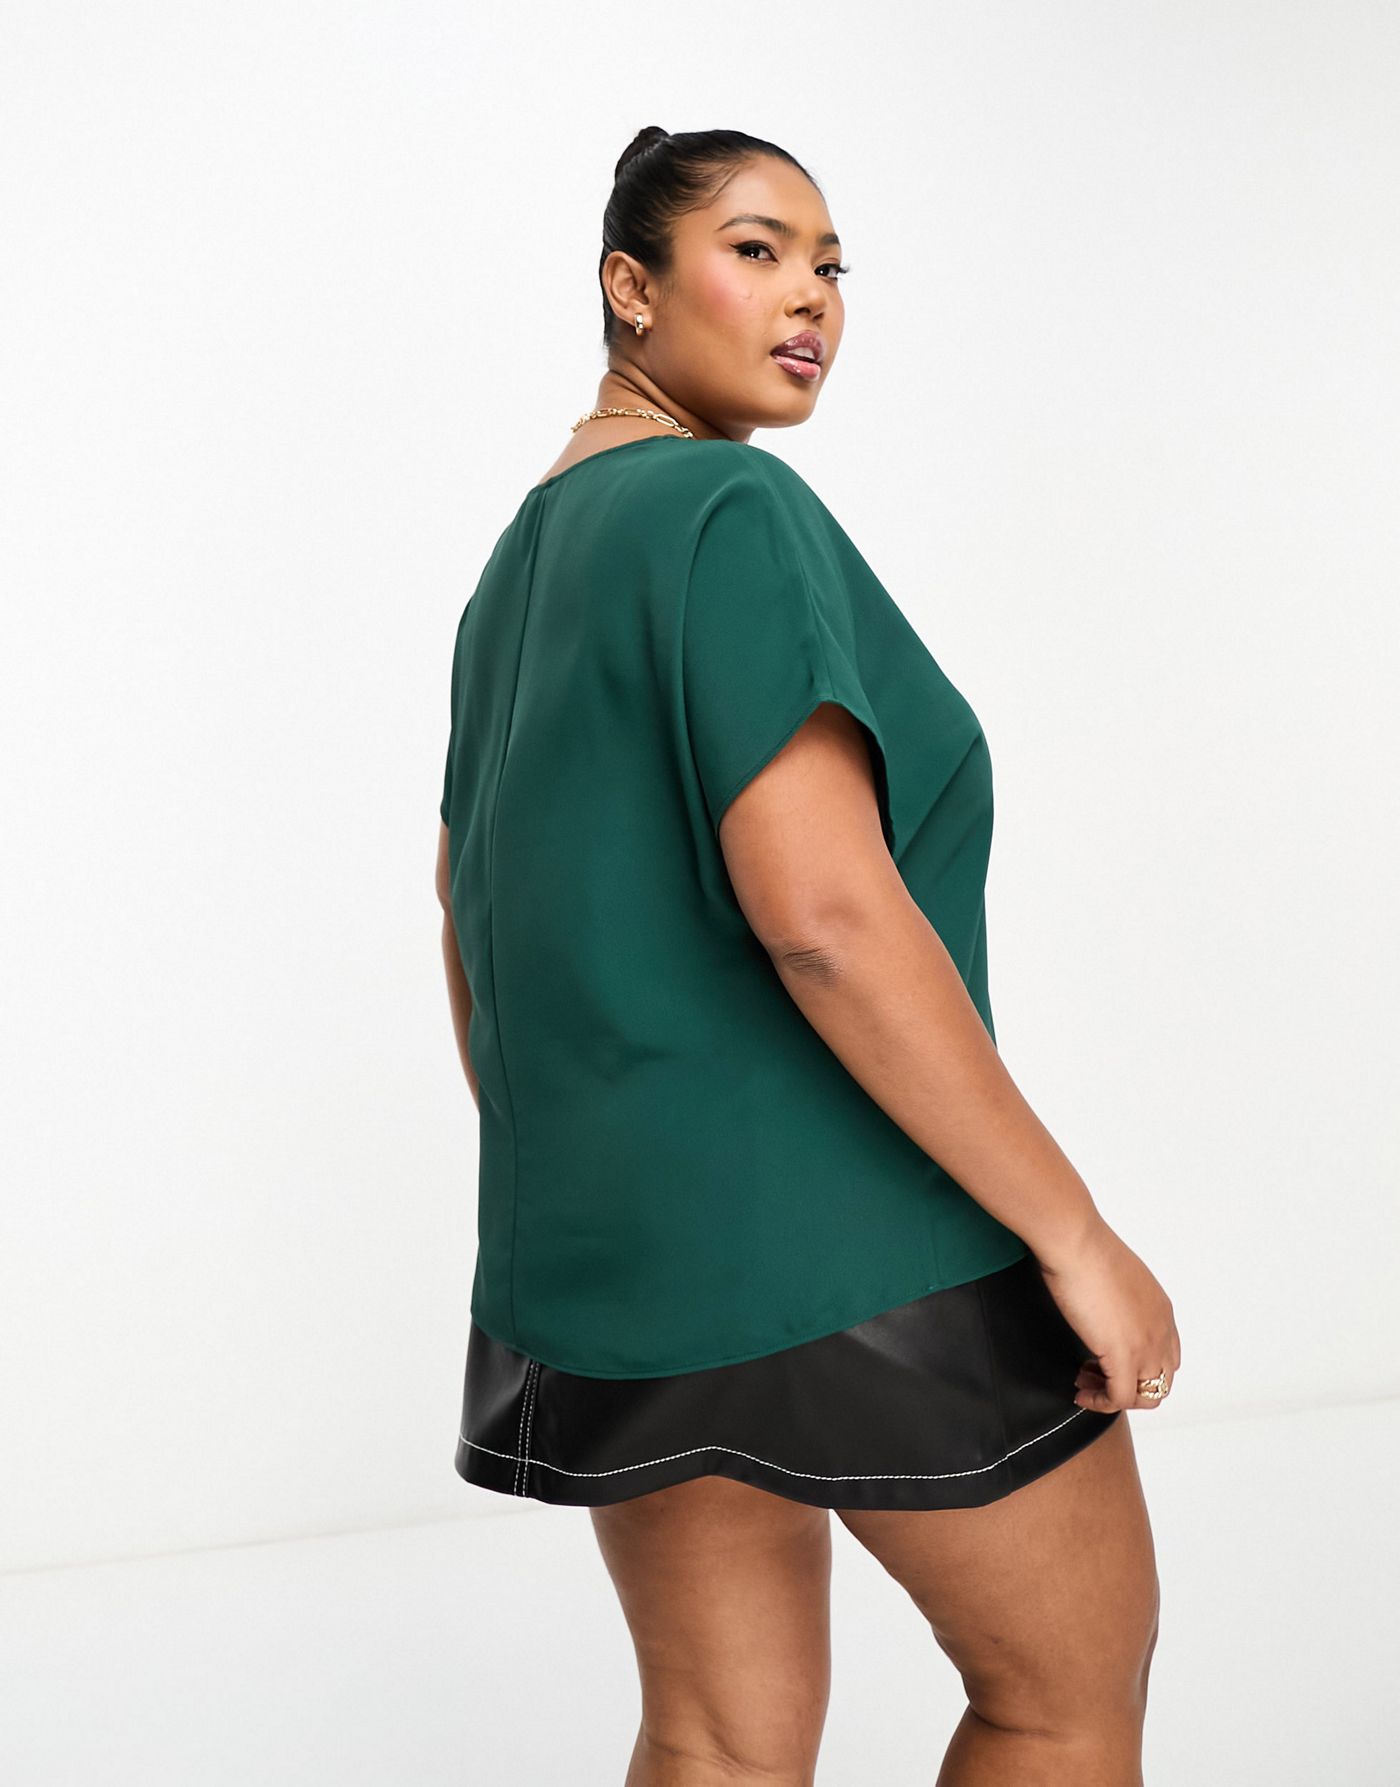 ASOS DESIGN Curve v-neck woven tee in forest green